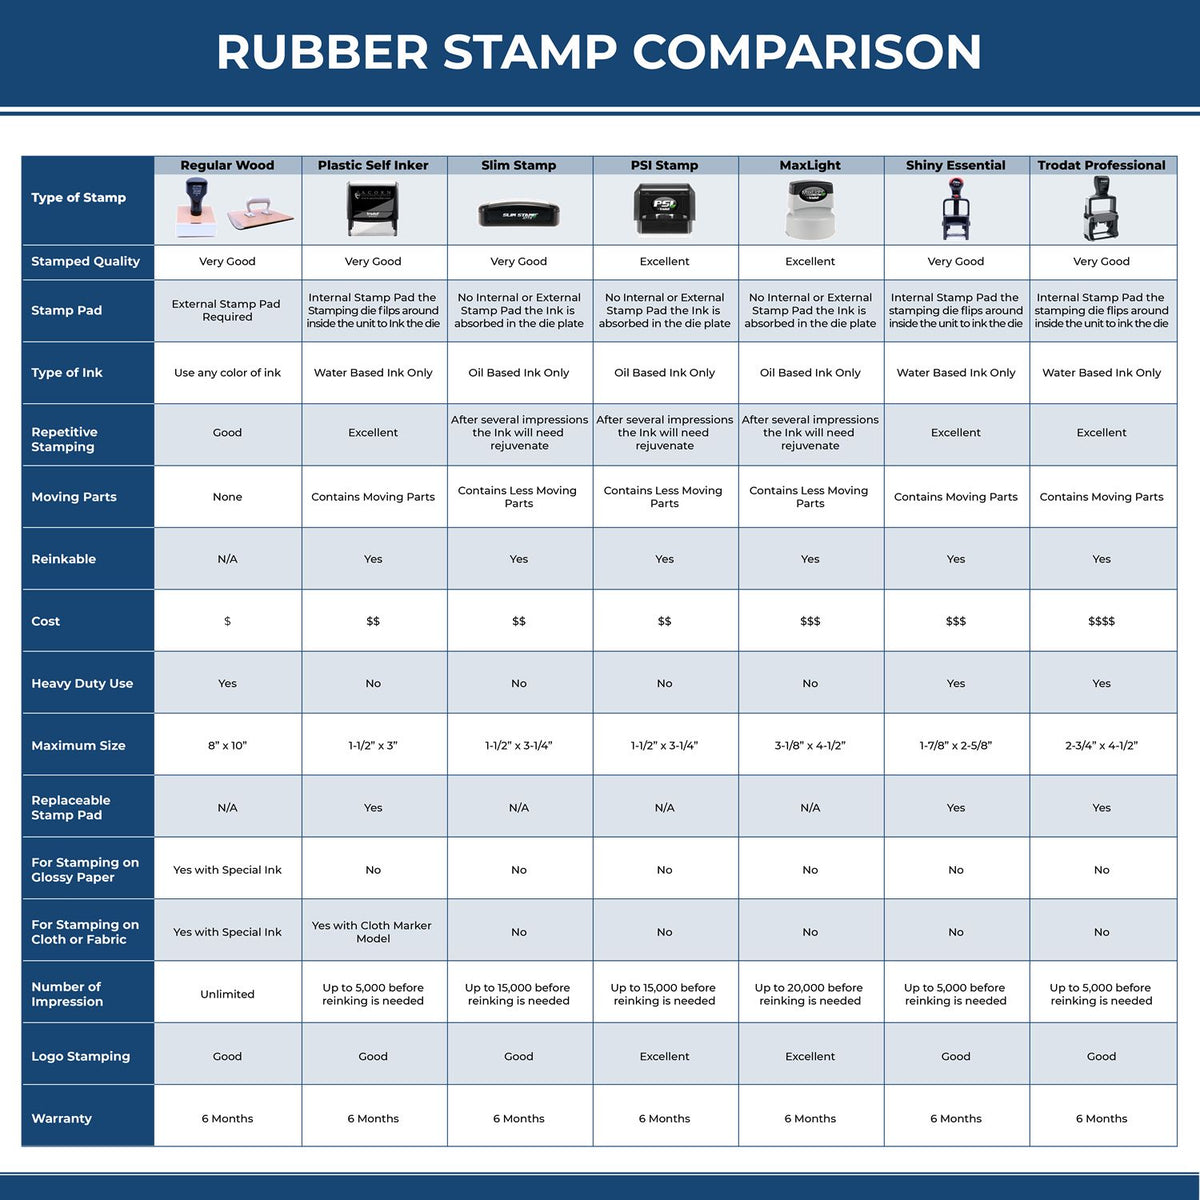 Large Self-Inking Rush with Rabbit Stamp 5665S Rubber Stamp Comparison